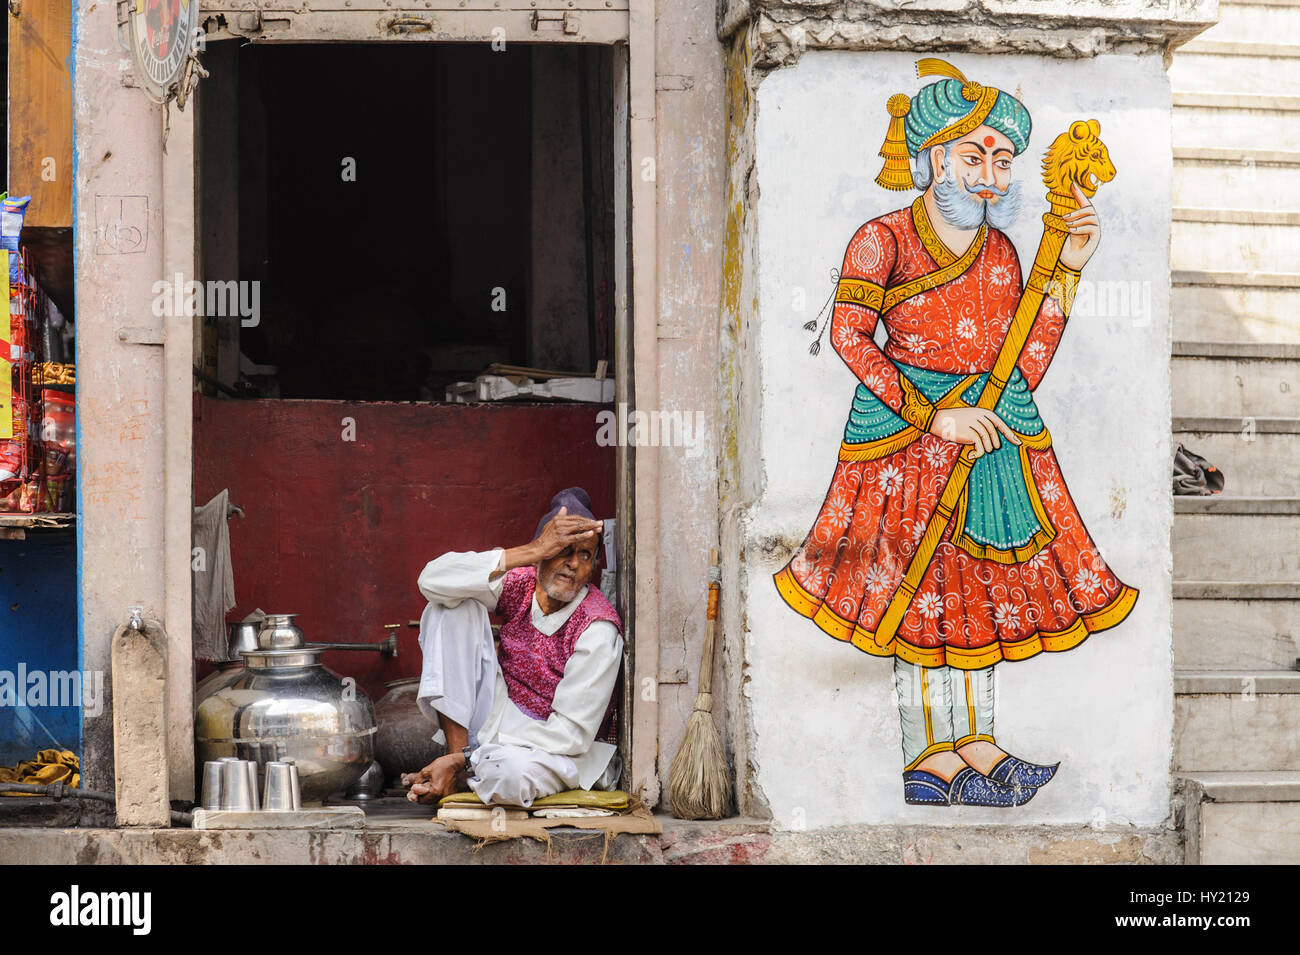 Chai wallah in his stall next to a Rajput wall painting in Udaipur Stock Photo